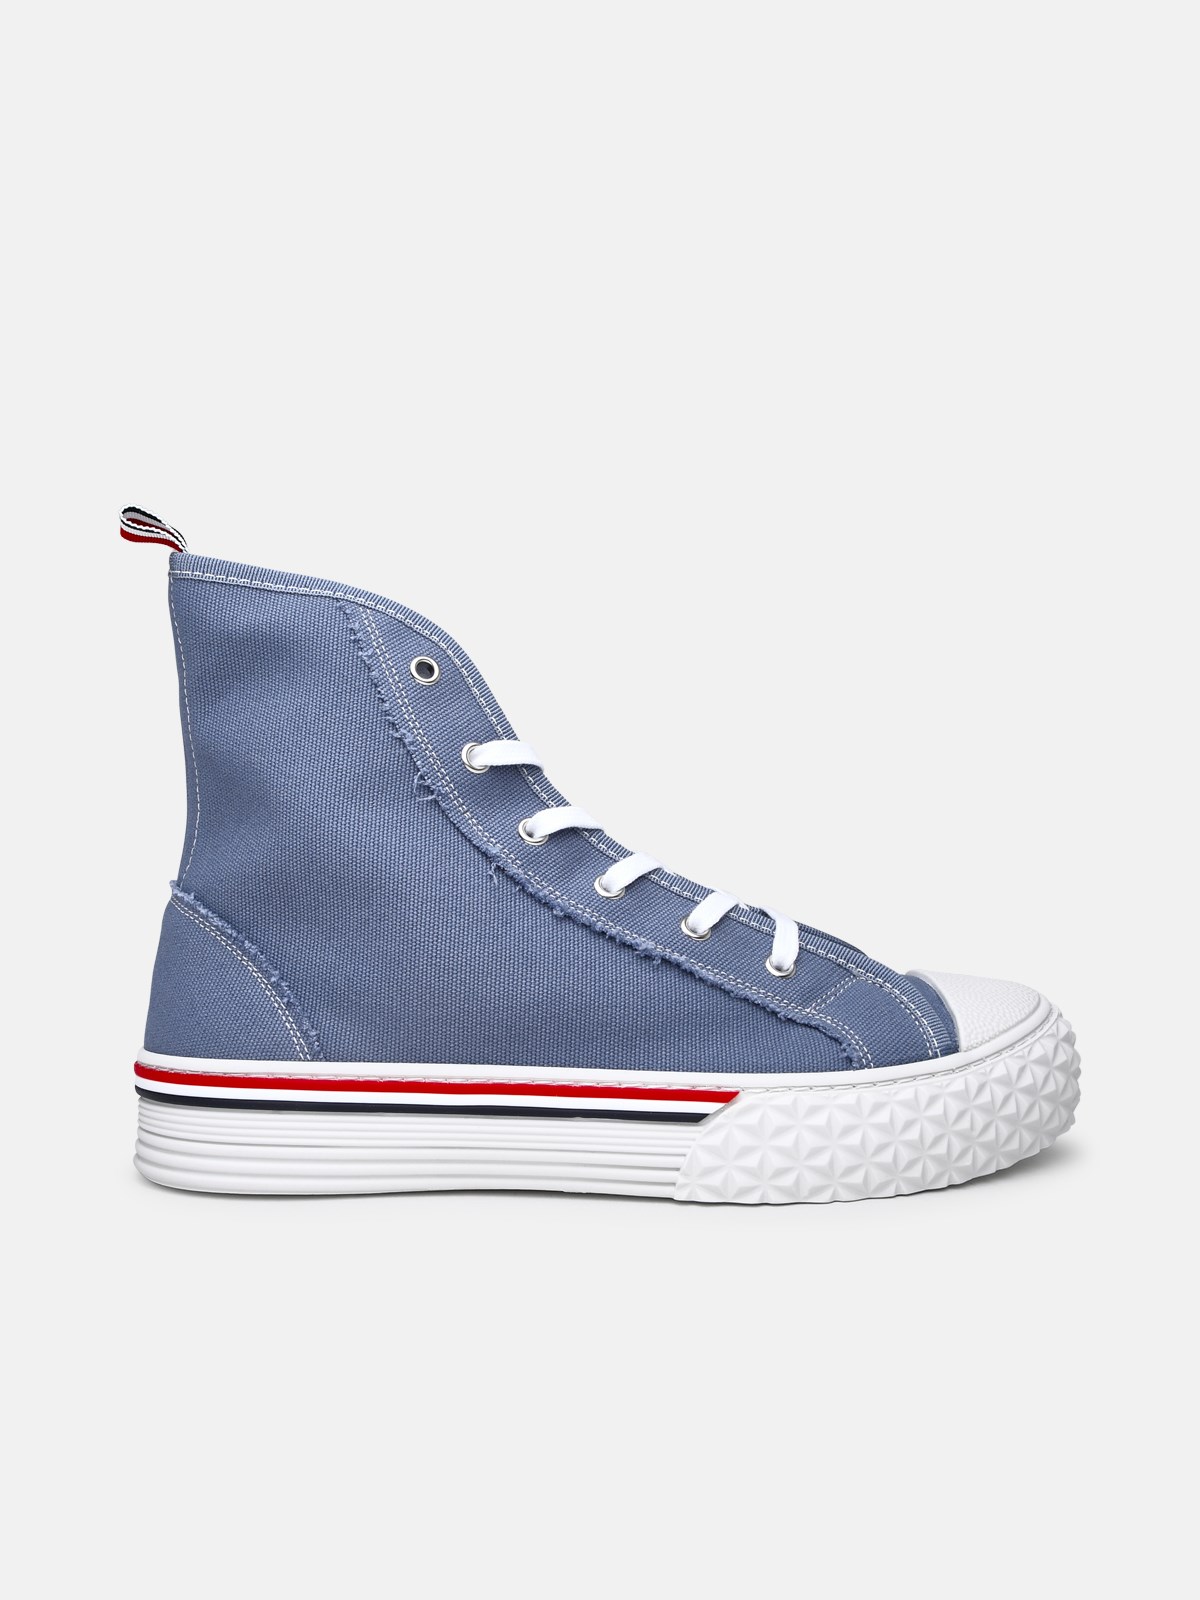 Thom Browne Sneakers In Light Blue Canvas